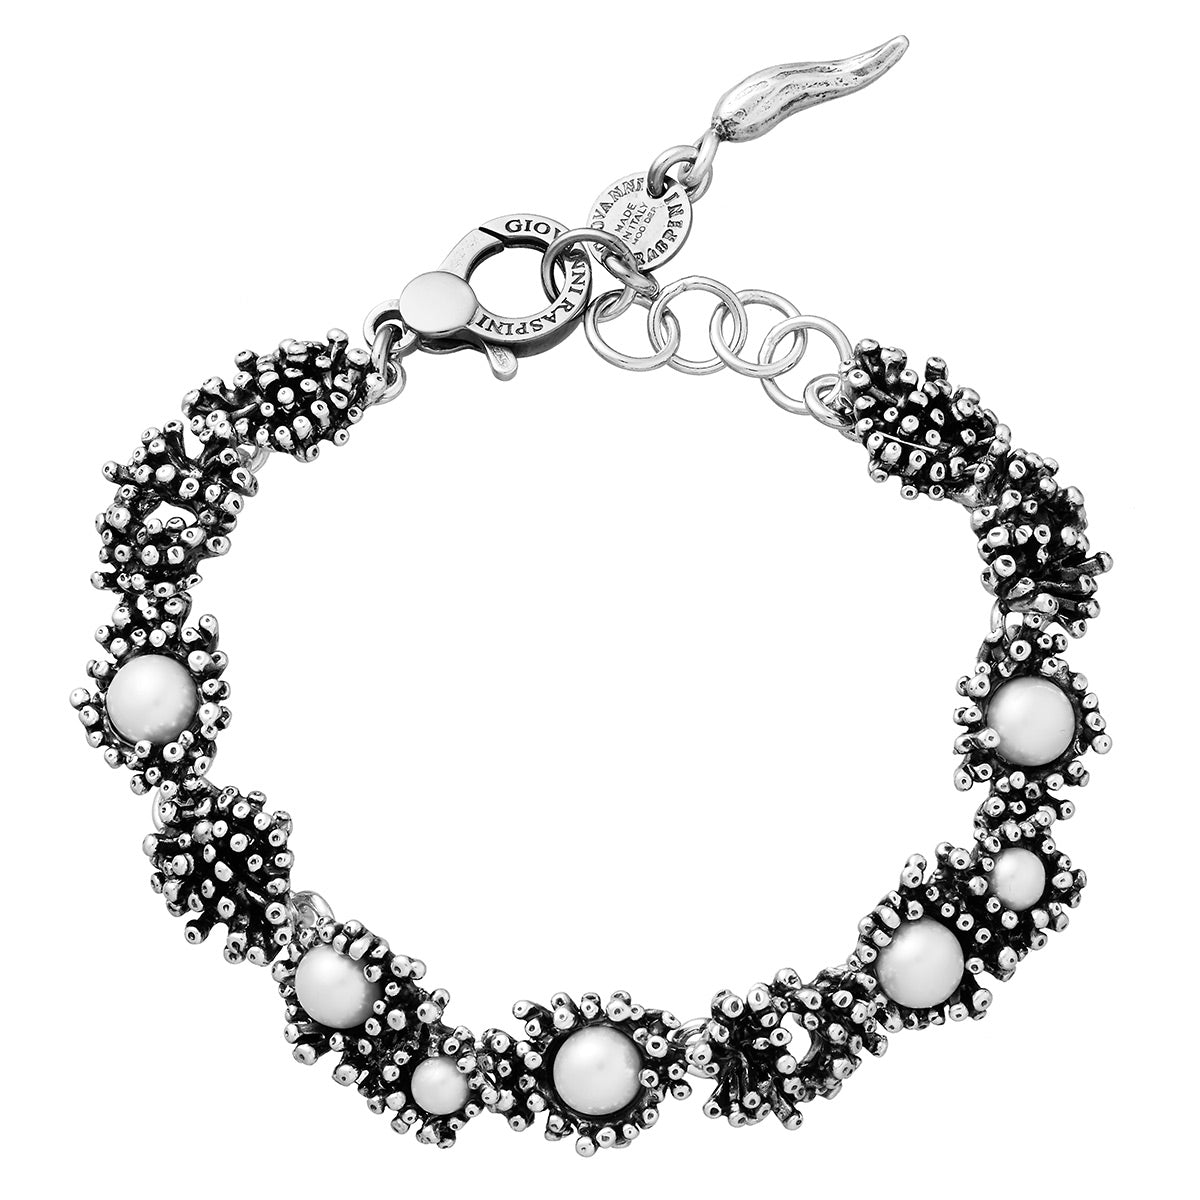 Giovanni Raspini Anemone Small Bracelet with Natural Pearls